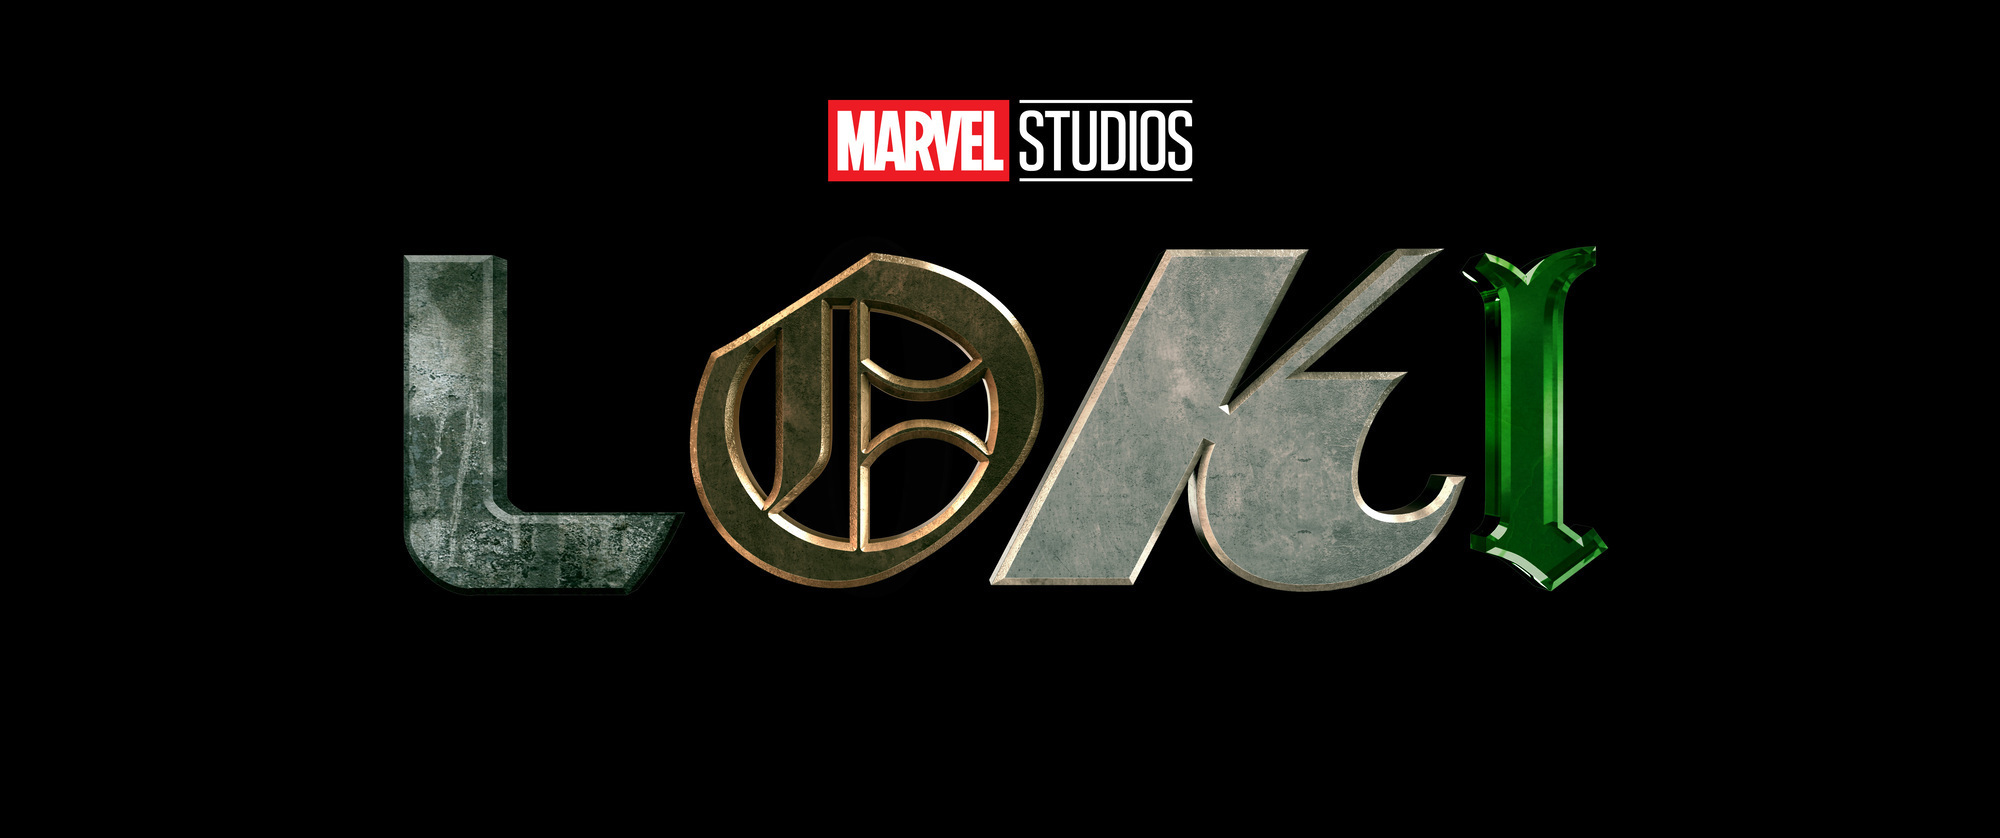 It Looks Like A Plethora Of Mischief Is Ahead In Marvel’s ‘Loki’ – TV Review